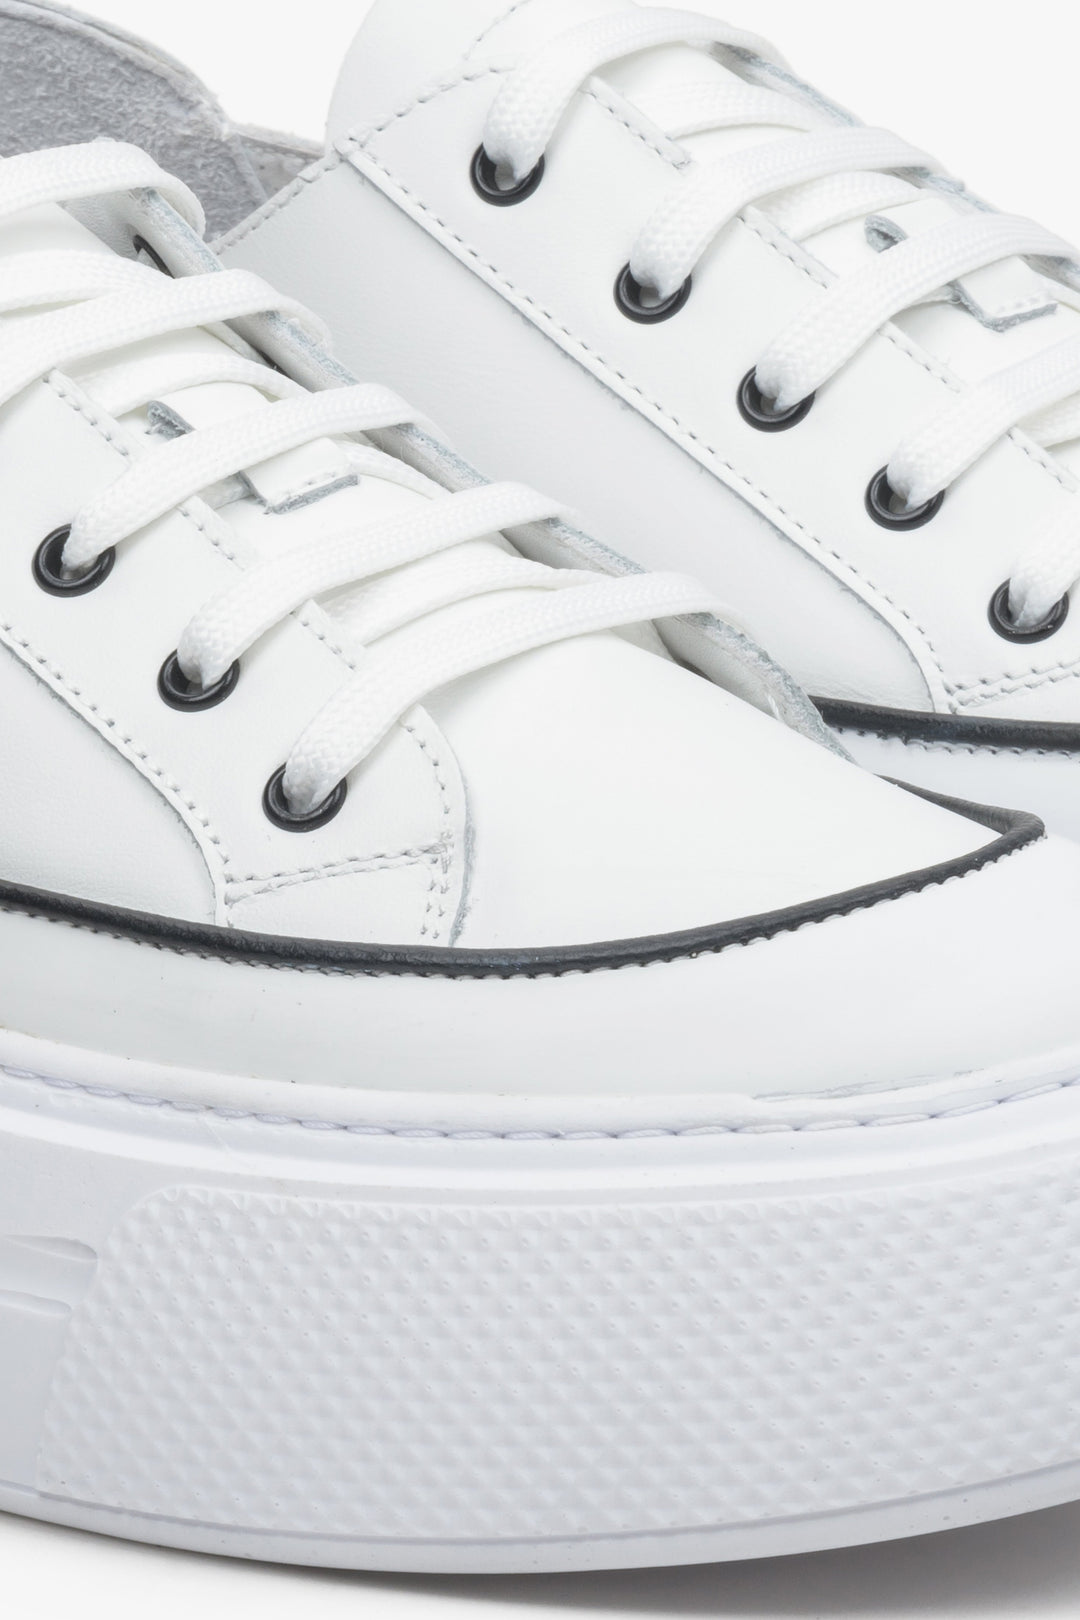 Women's low top sneakers made of genuine leather in white - close-up on details.